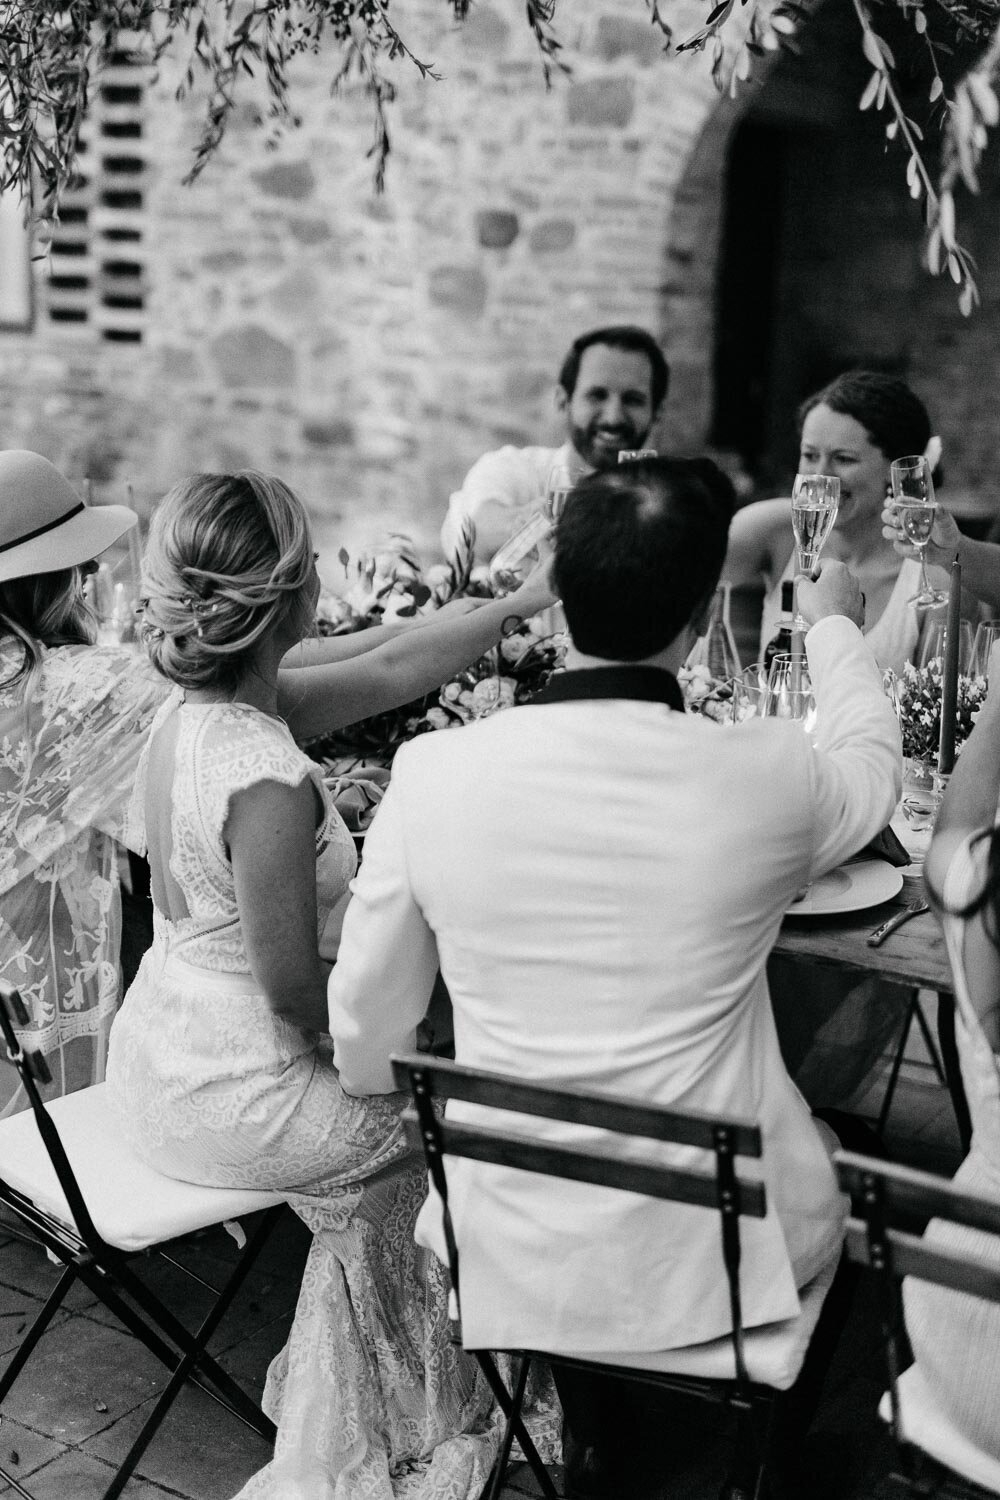 Cheers with friends during wedding reception in Tuscany